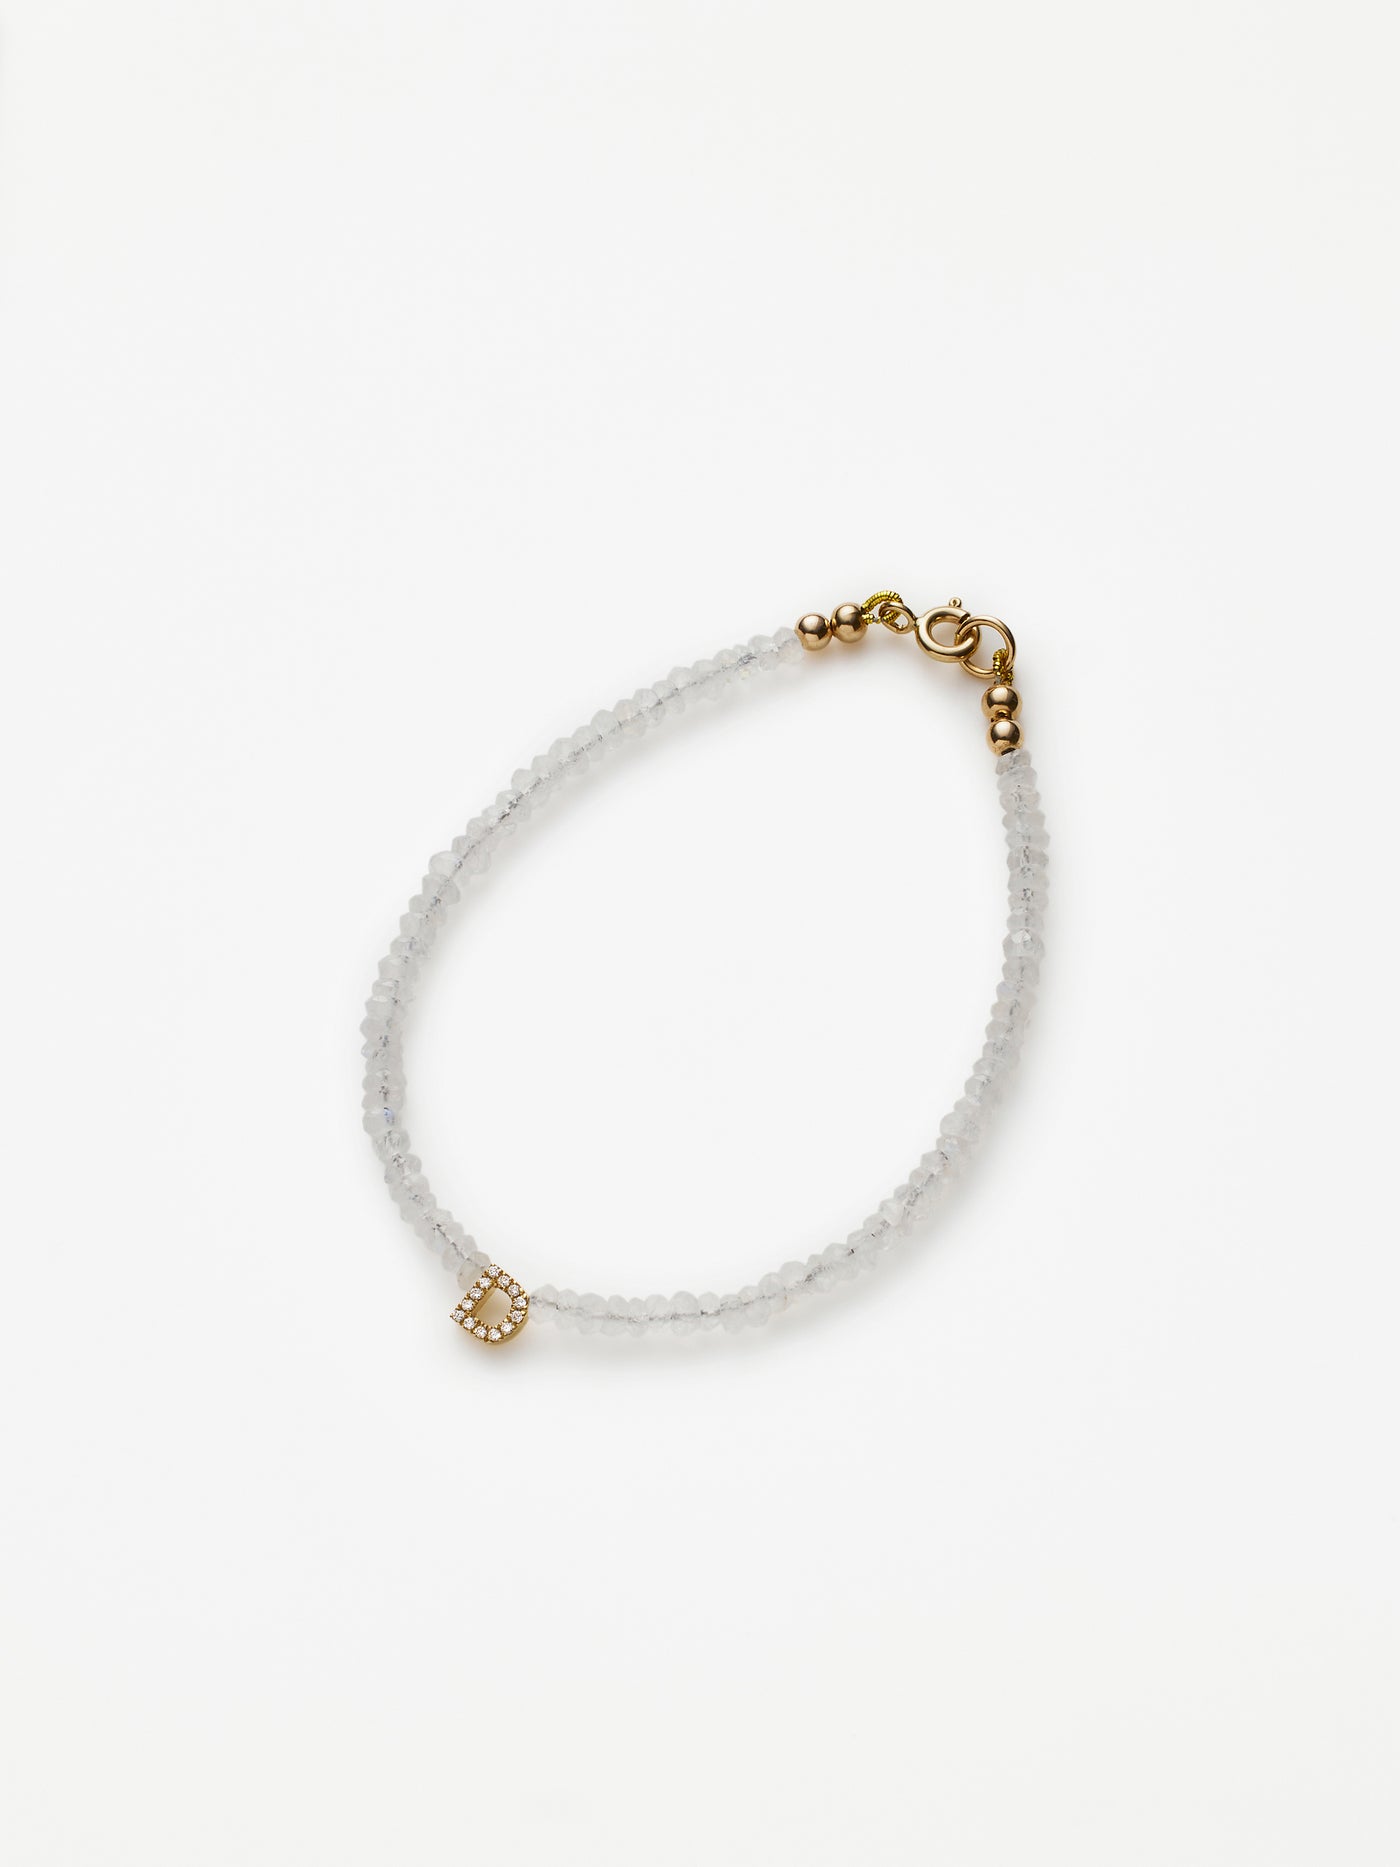 Hand-strung bracelet with natural rainbow moonstone gemstones and miniature three-dimensional diamond letter in 18k solid gold